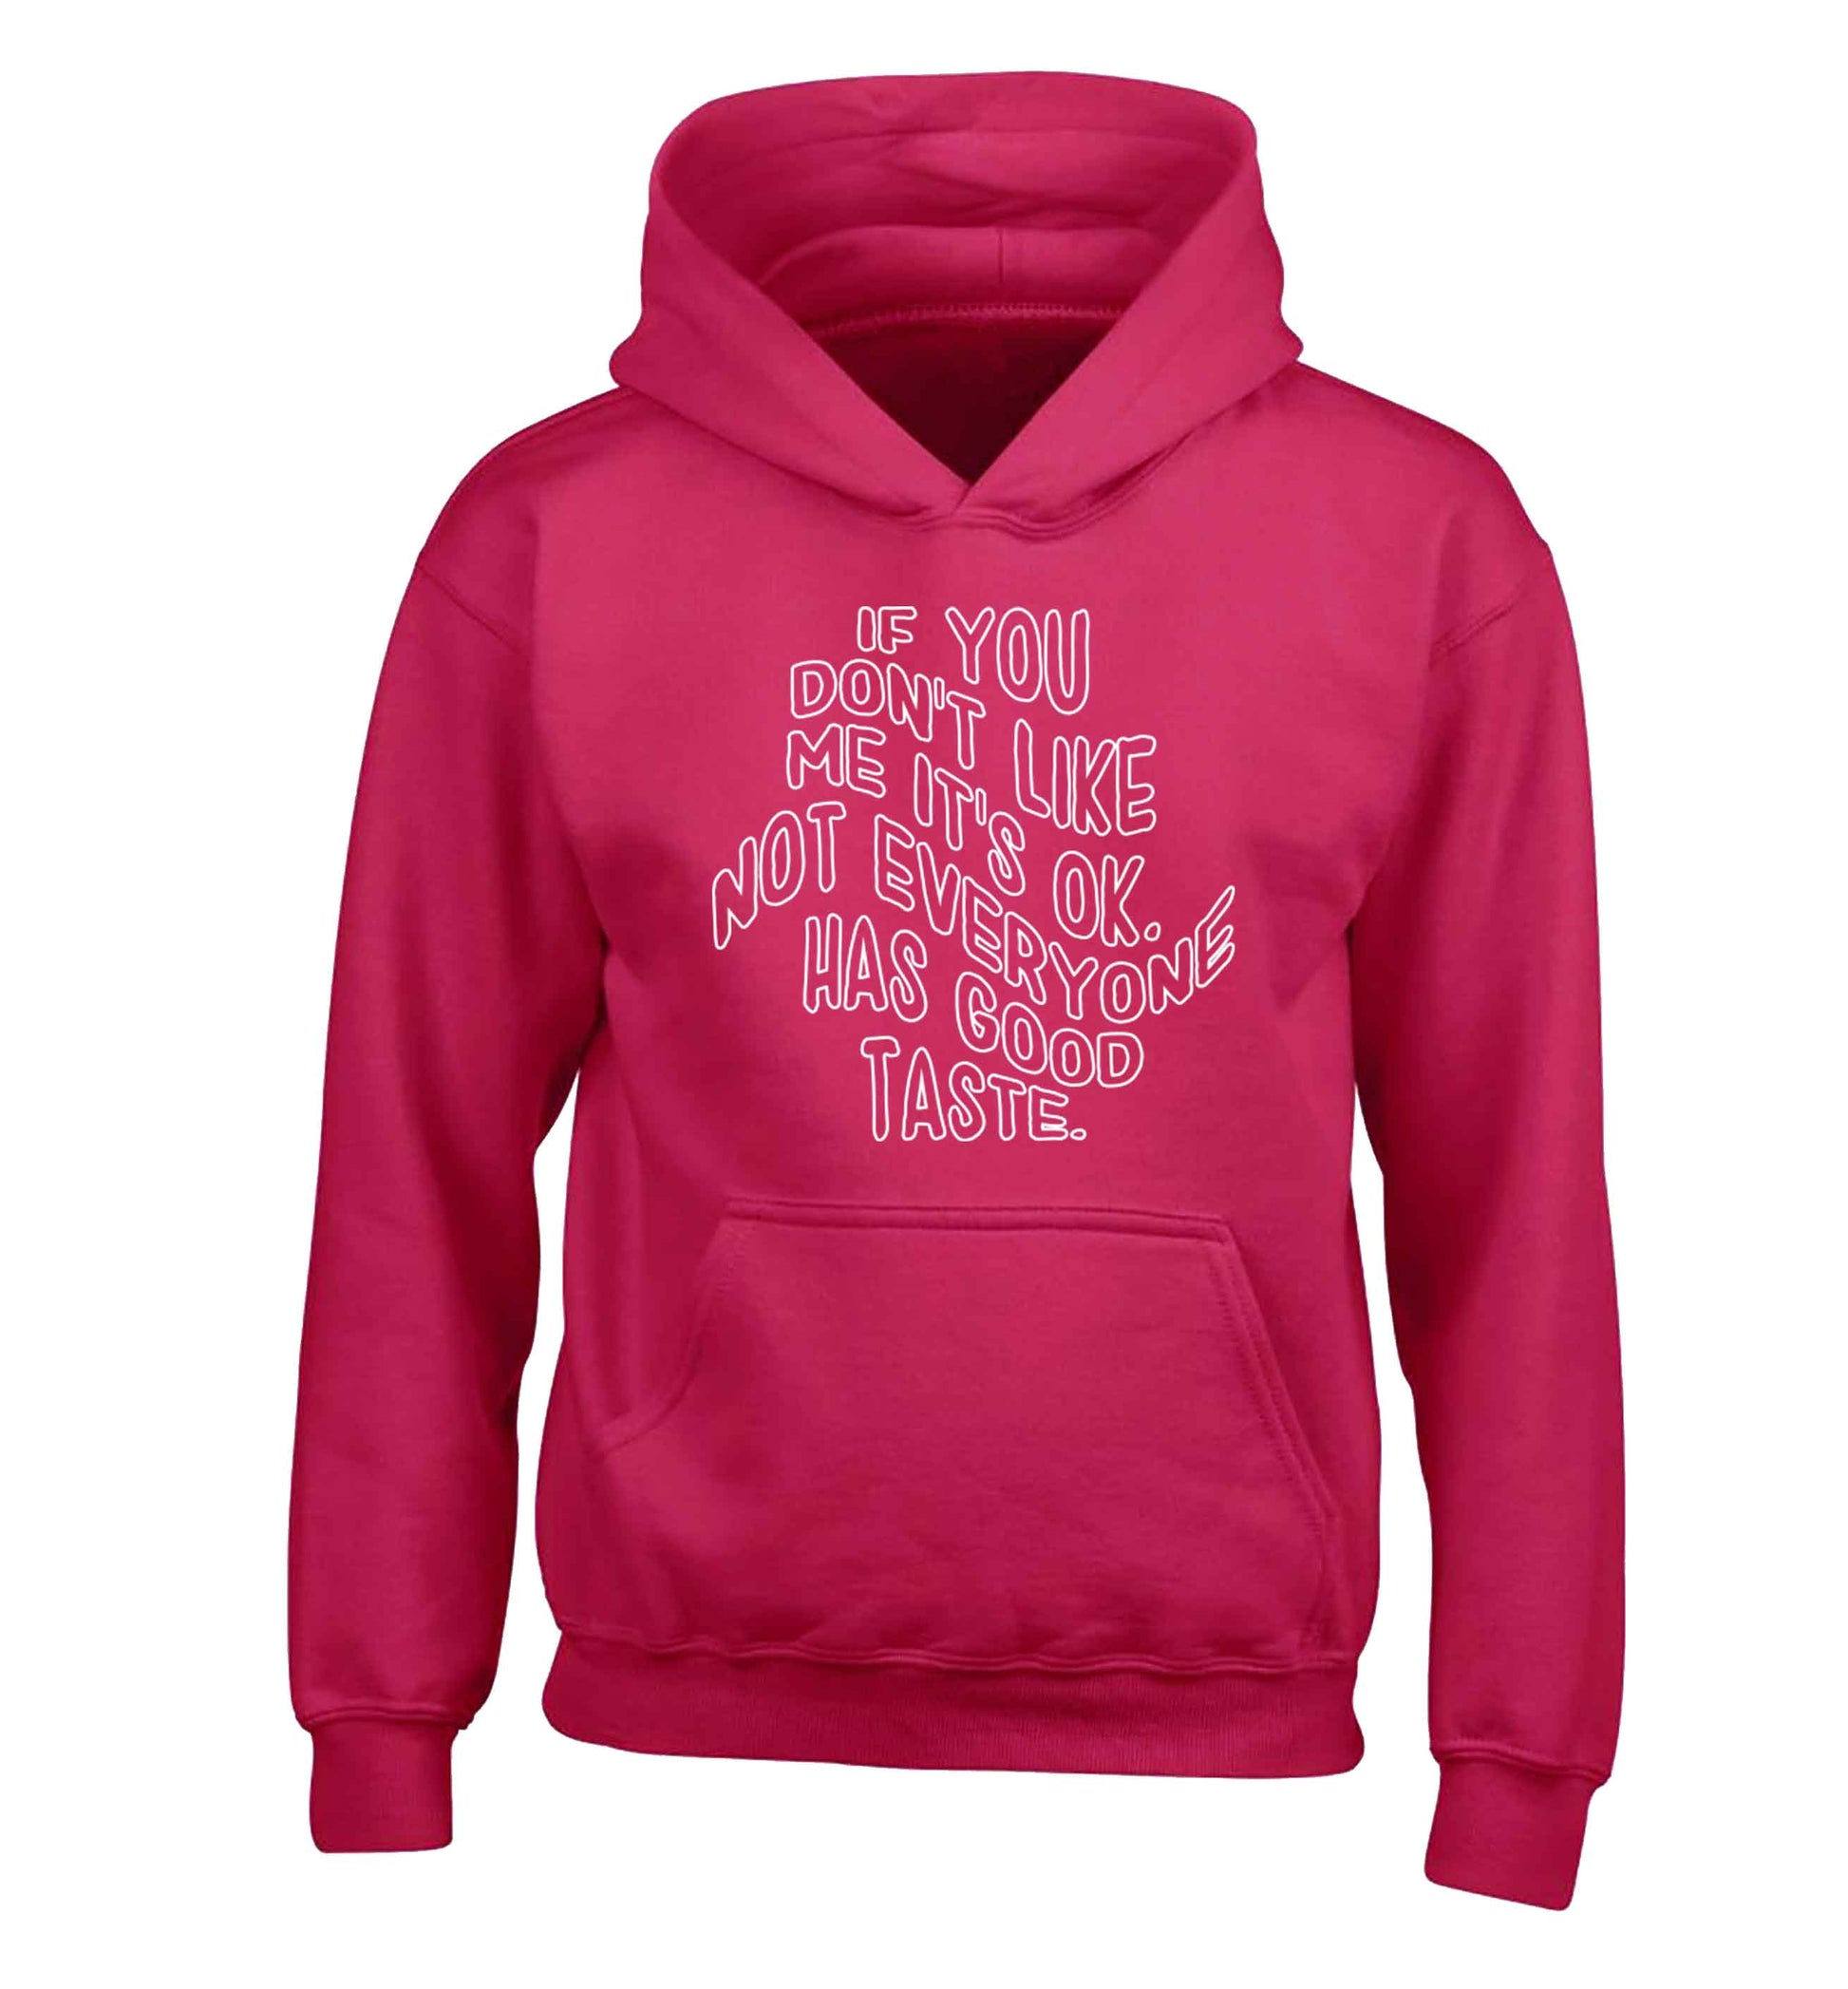 If you don't like me it's ok not everyone has good taste children's pink hoodie 12-13 Years